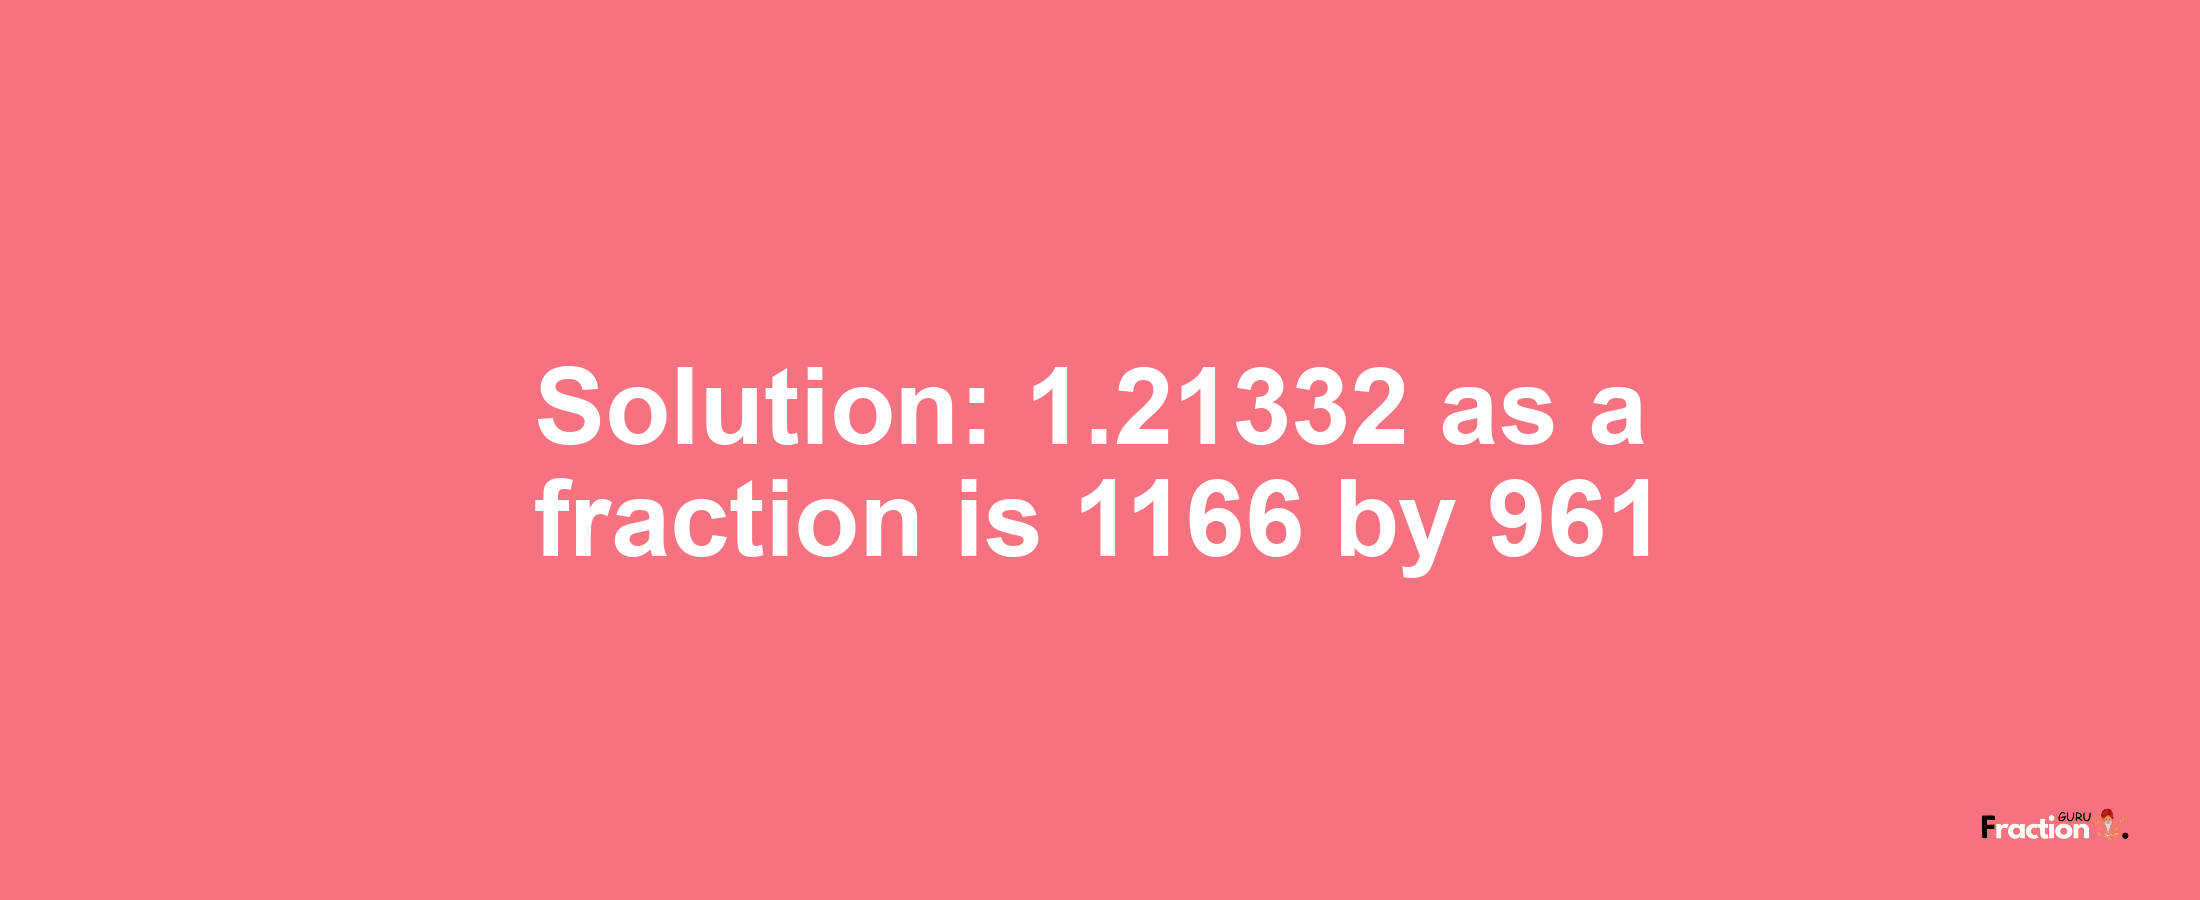 Solution:1.21332 as a fraction is 1166/961